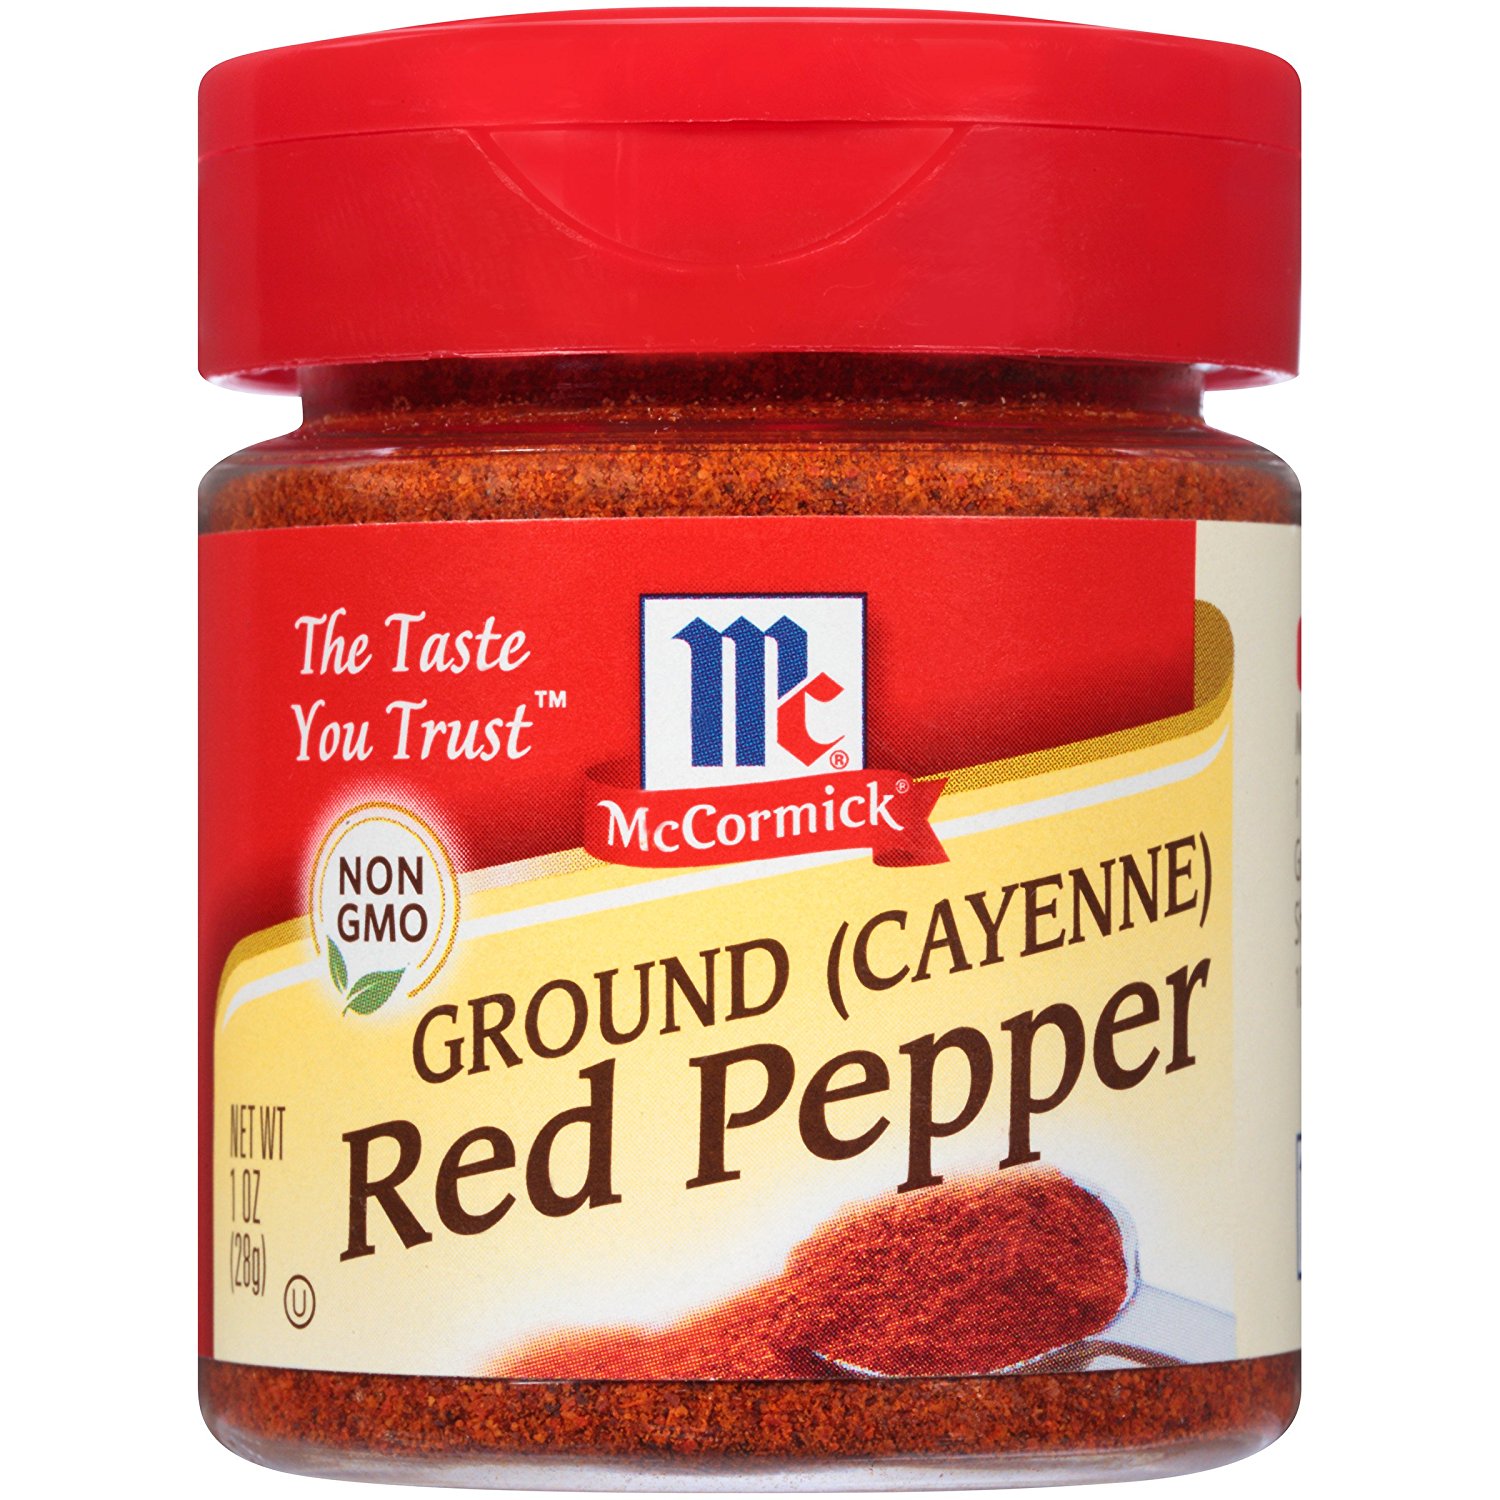 Amazon.com: McCormick Ground (Cayenne) Red Pepper, 1 oz: Prime Pantry